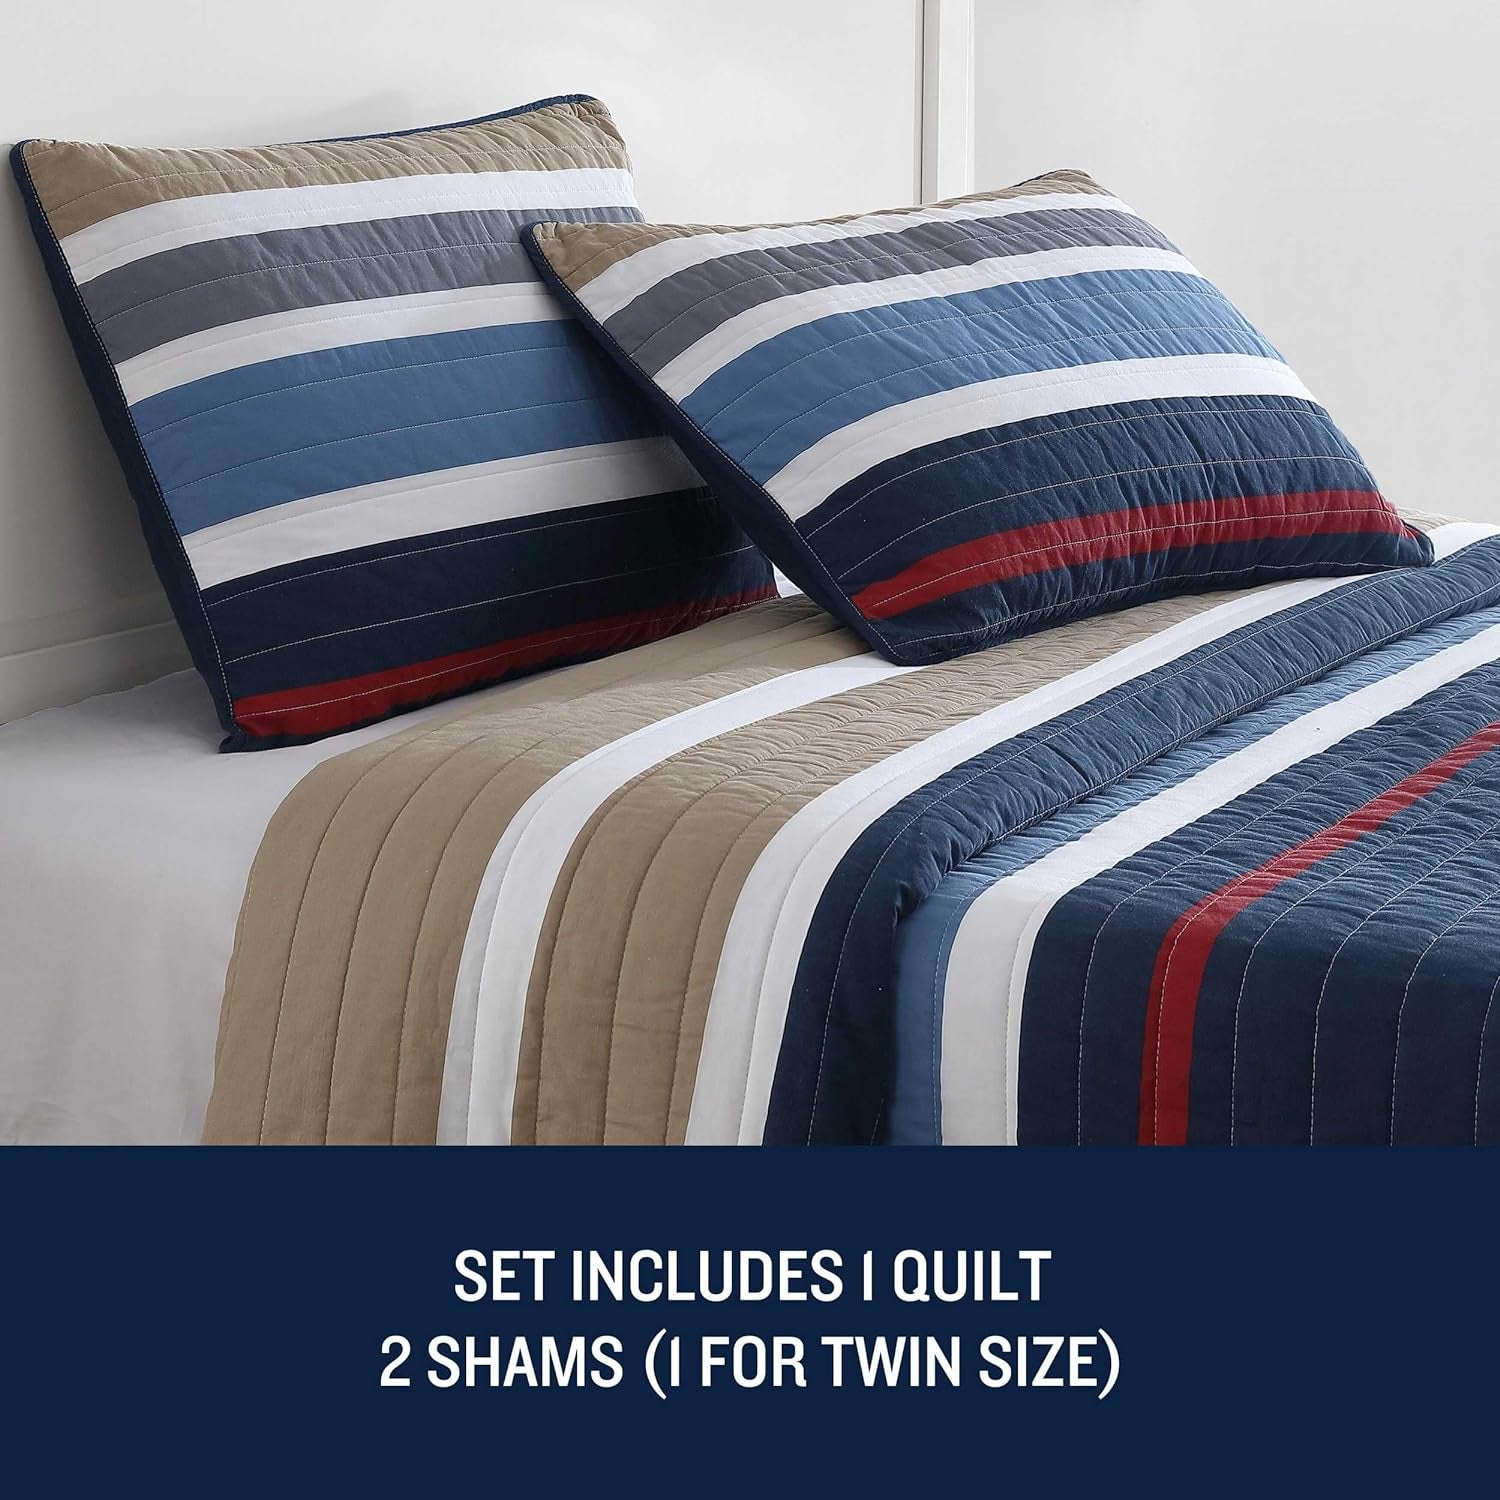 Nautica - Twin Quilt Set, Reversible Cotton Bedding with Matching Sham, Bold & Colorful Home Decor for All Seasons (Bradford Navy Blue, Twin)